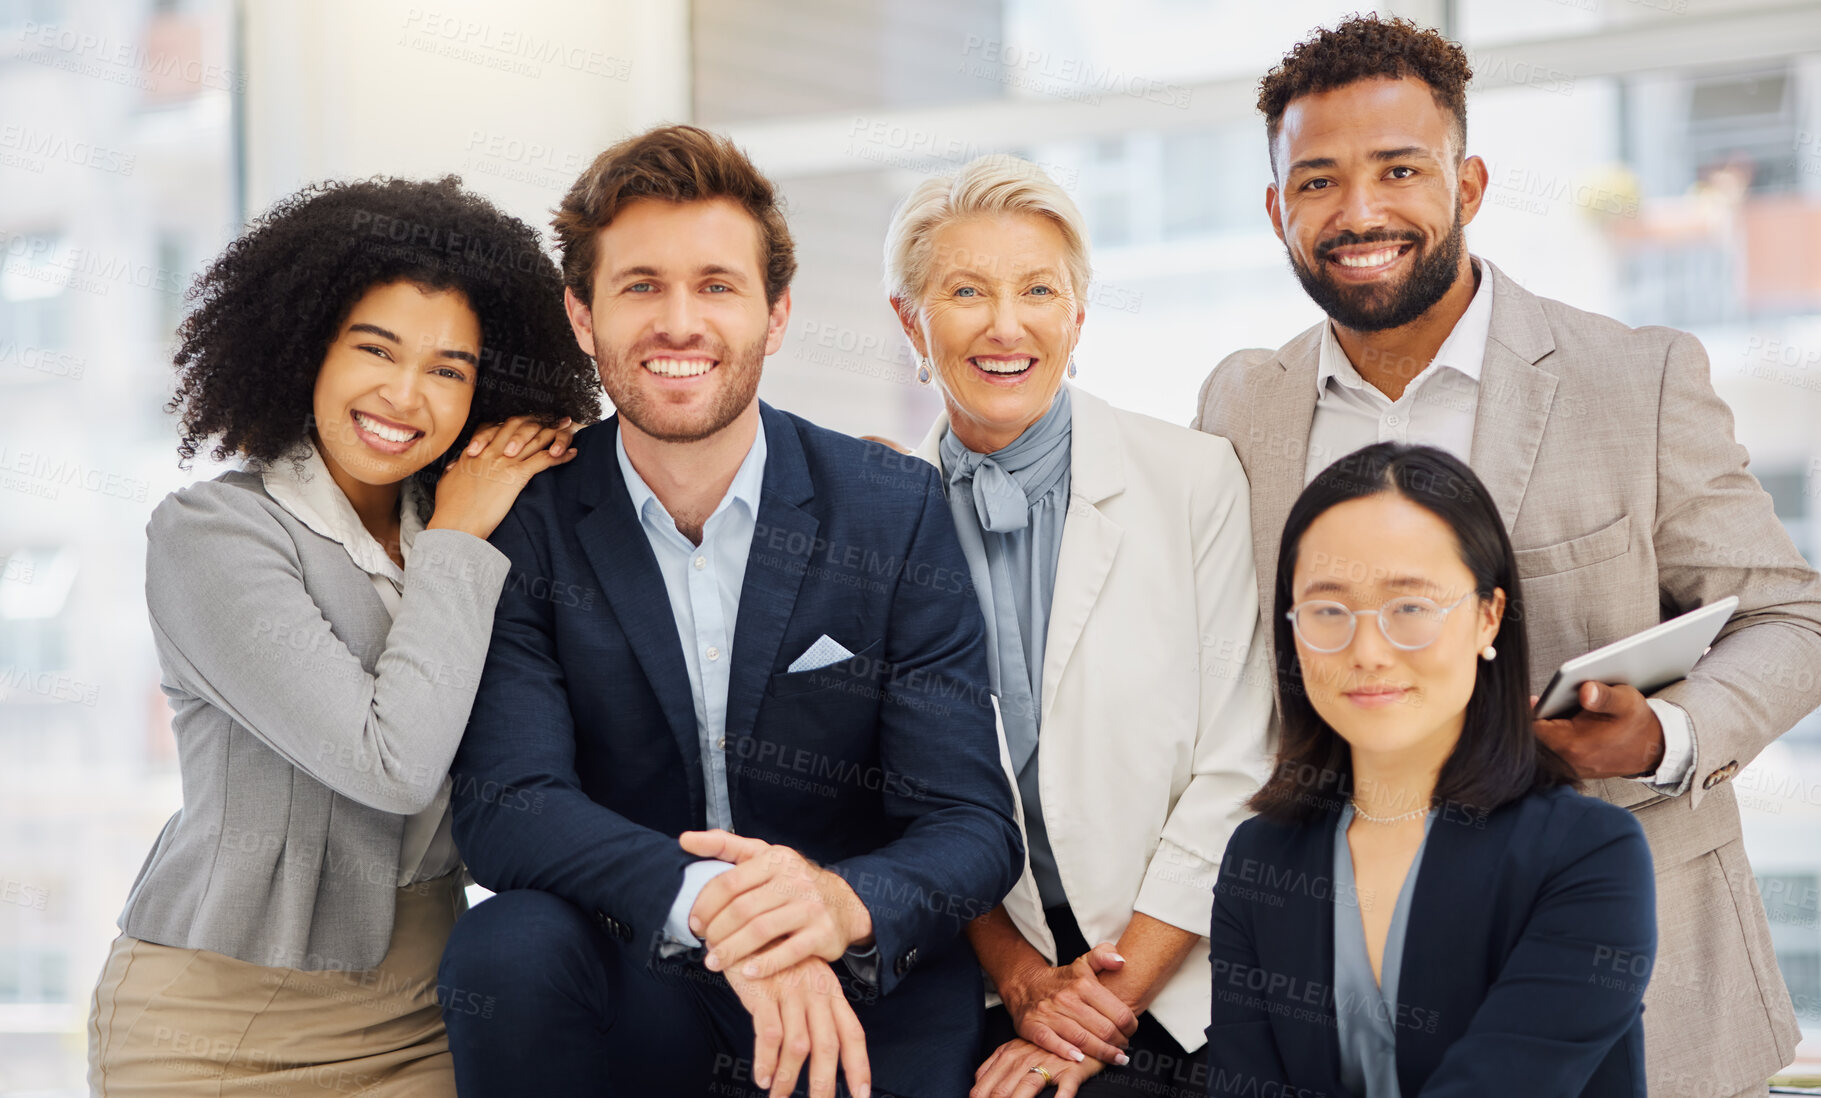 Buy stock photo Corporate, happy and portrait of business people in office with confidence, pride and motivation. Teamwork, diversity and group of men and women with smile for success, company mission and happiness